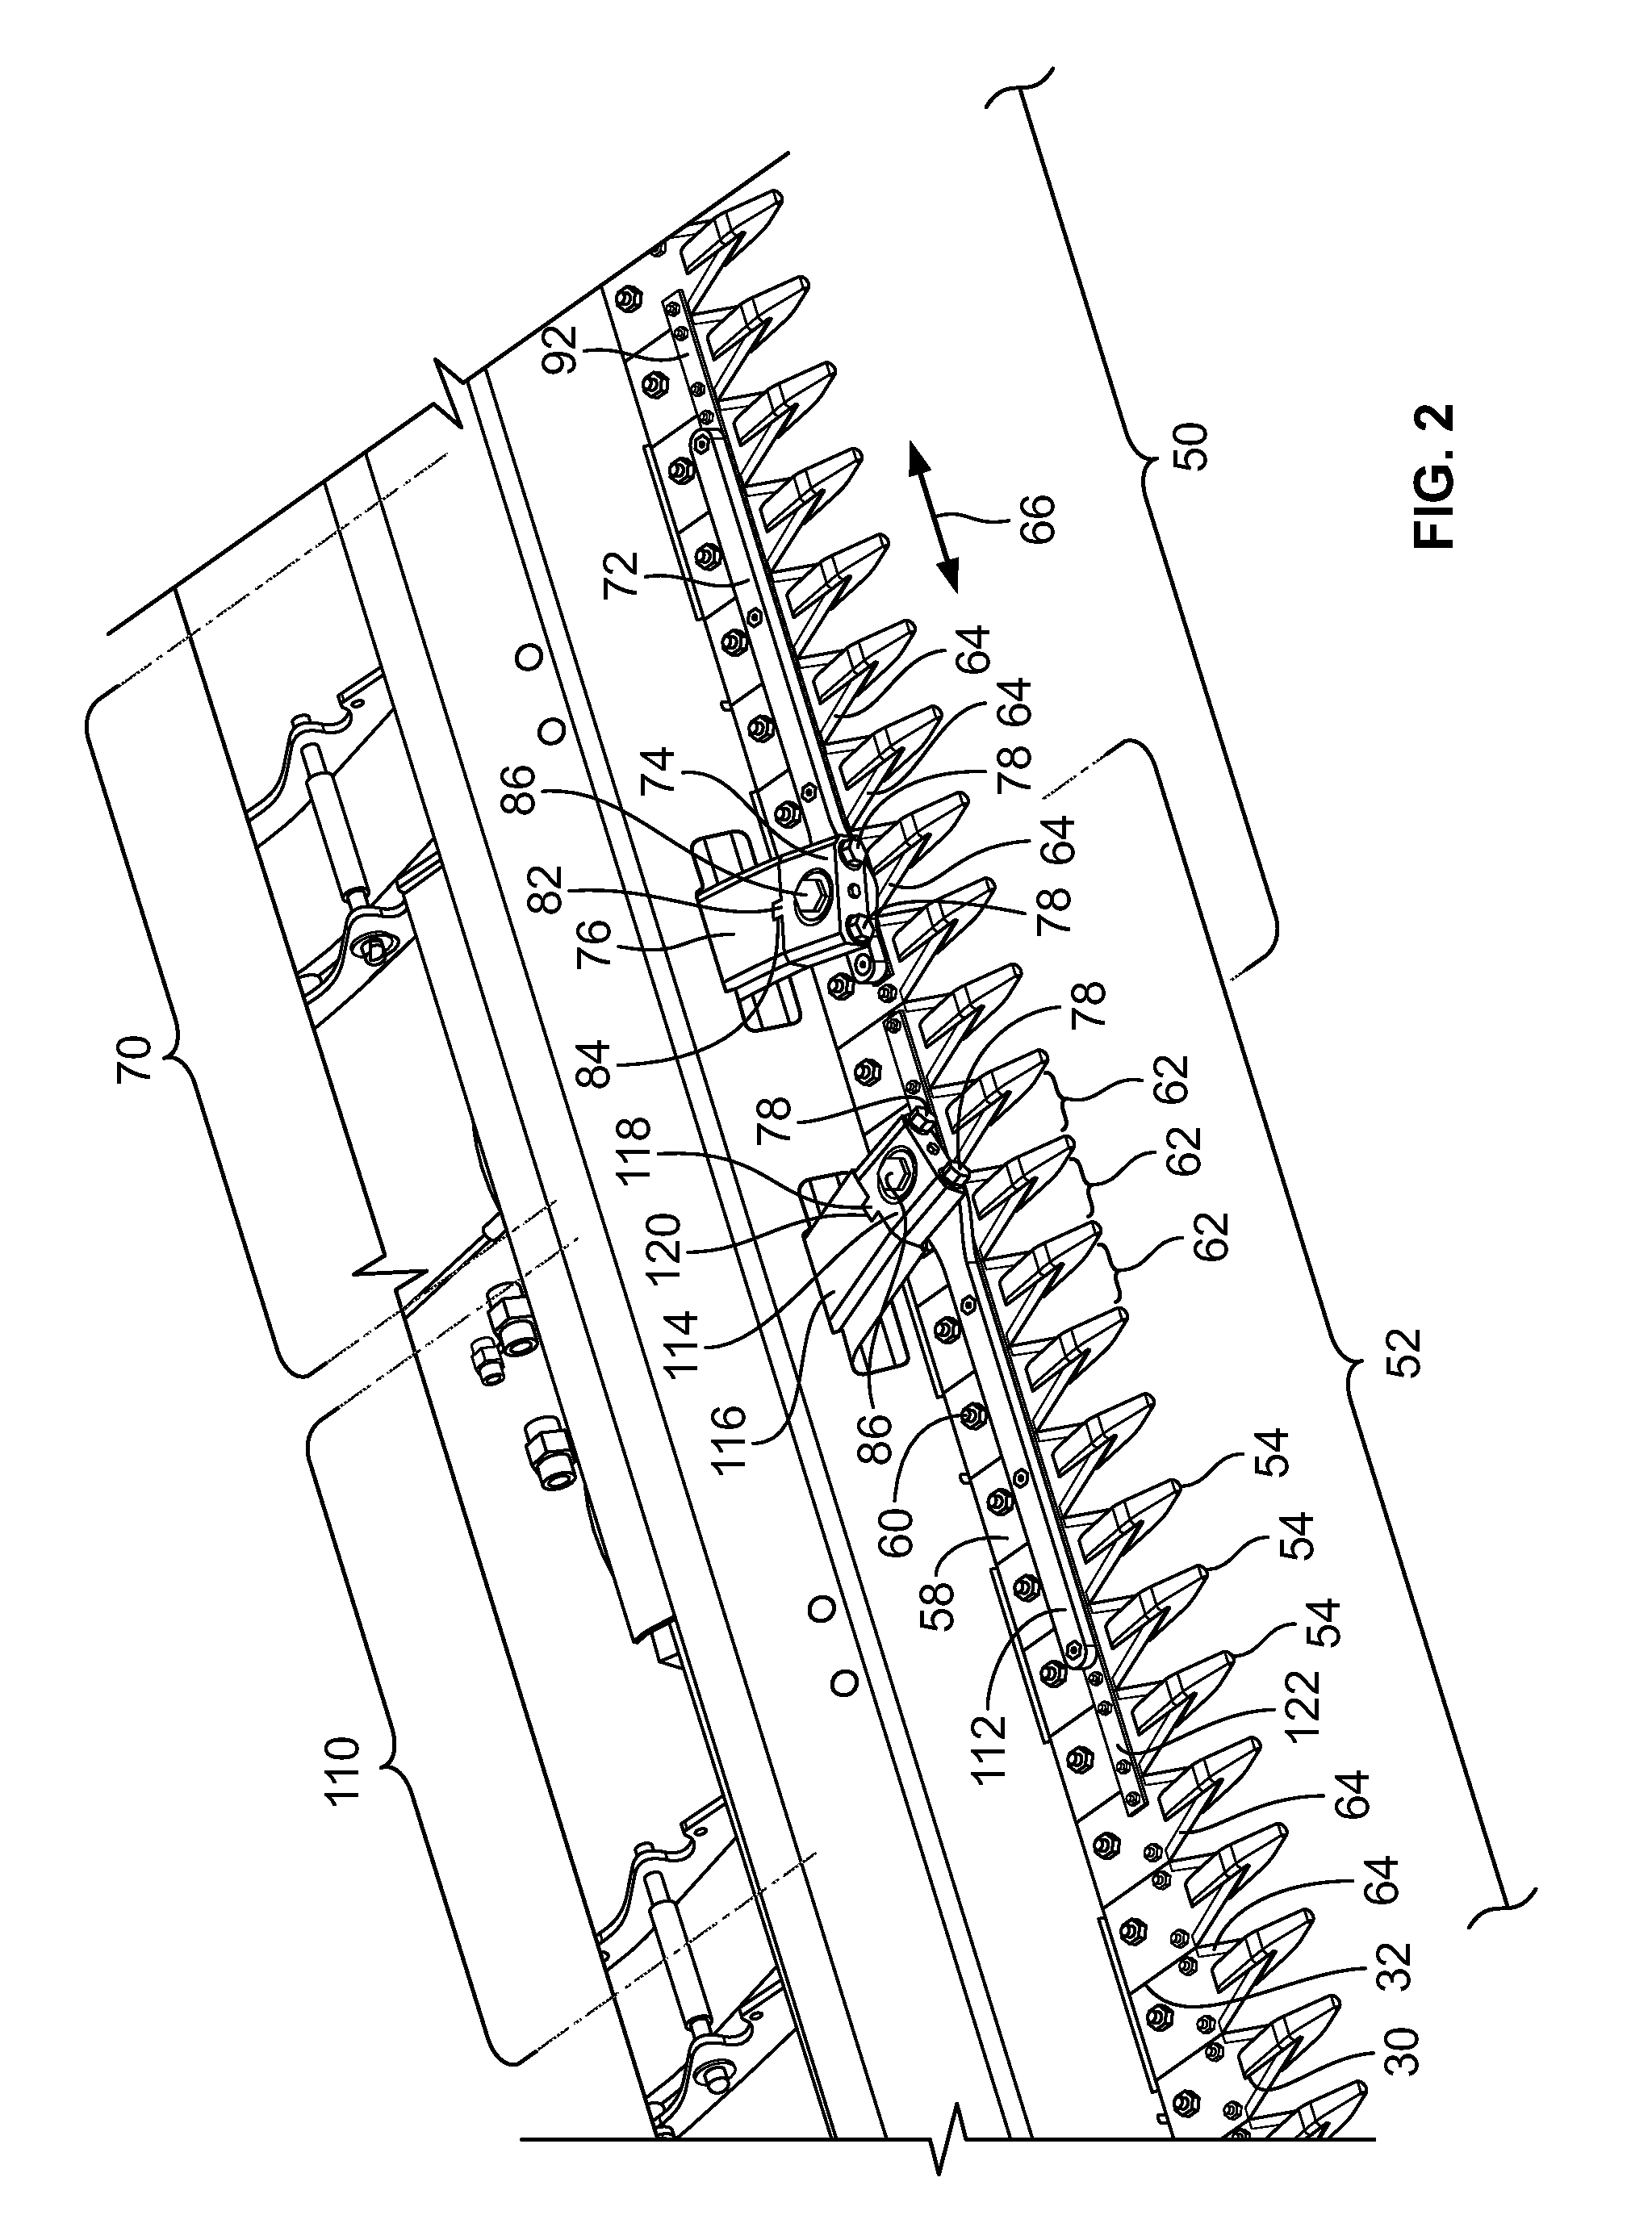 Blade assembly removal from a header of a plant cutting machine